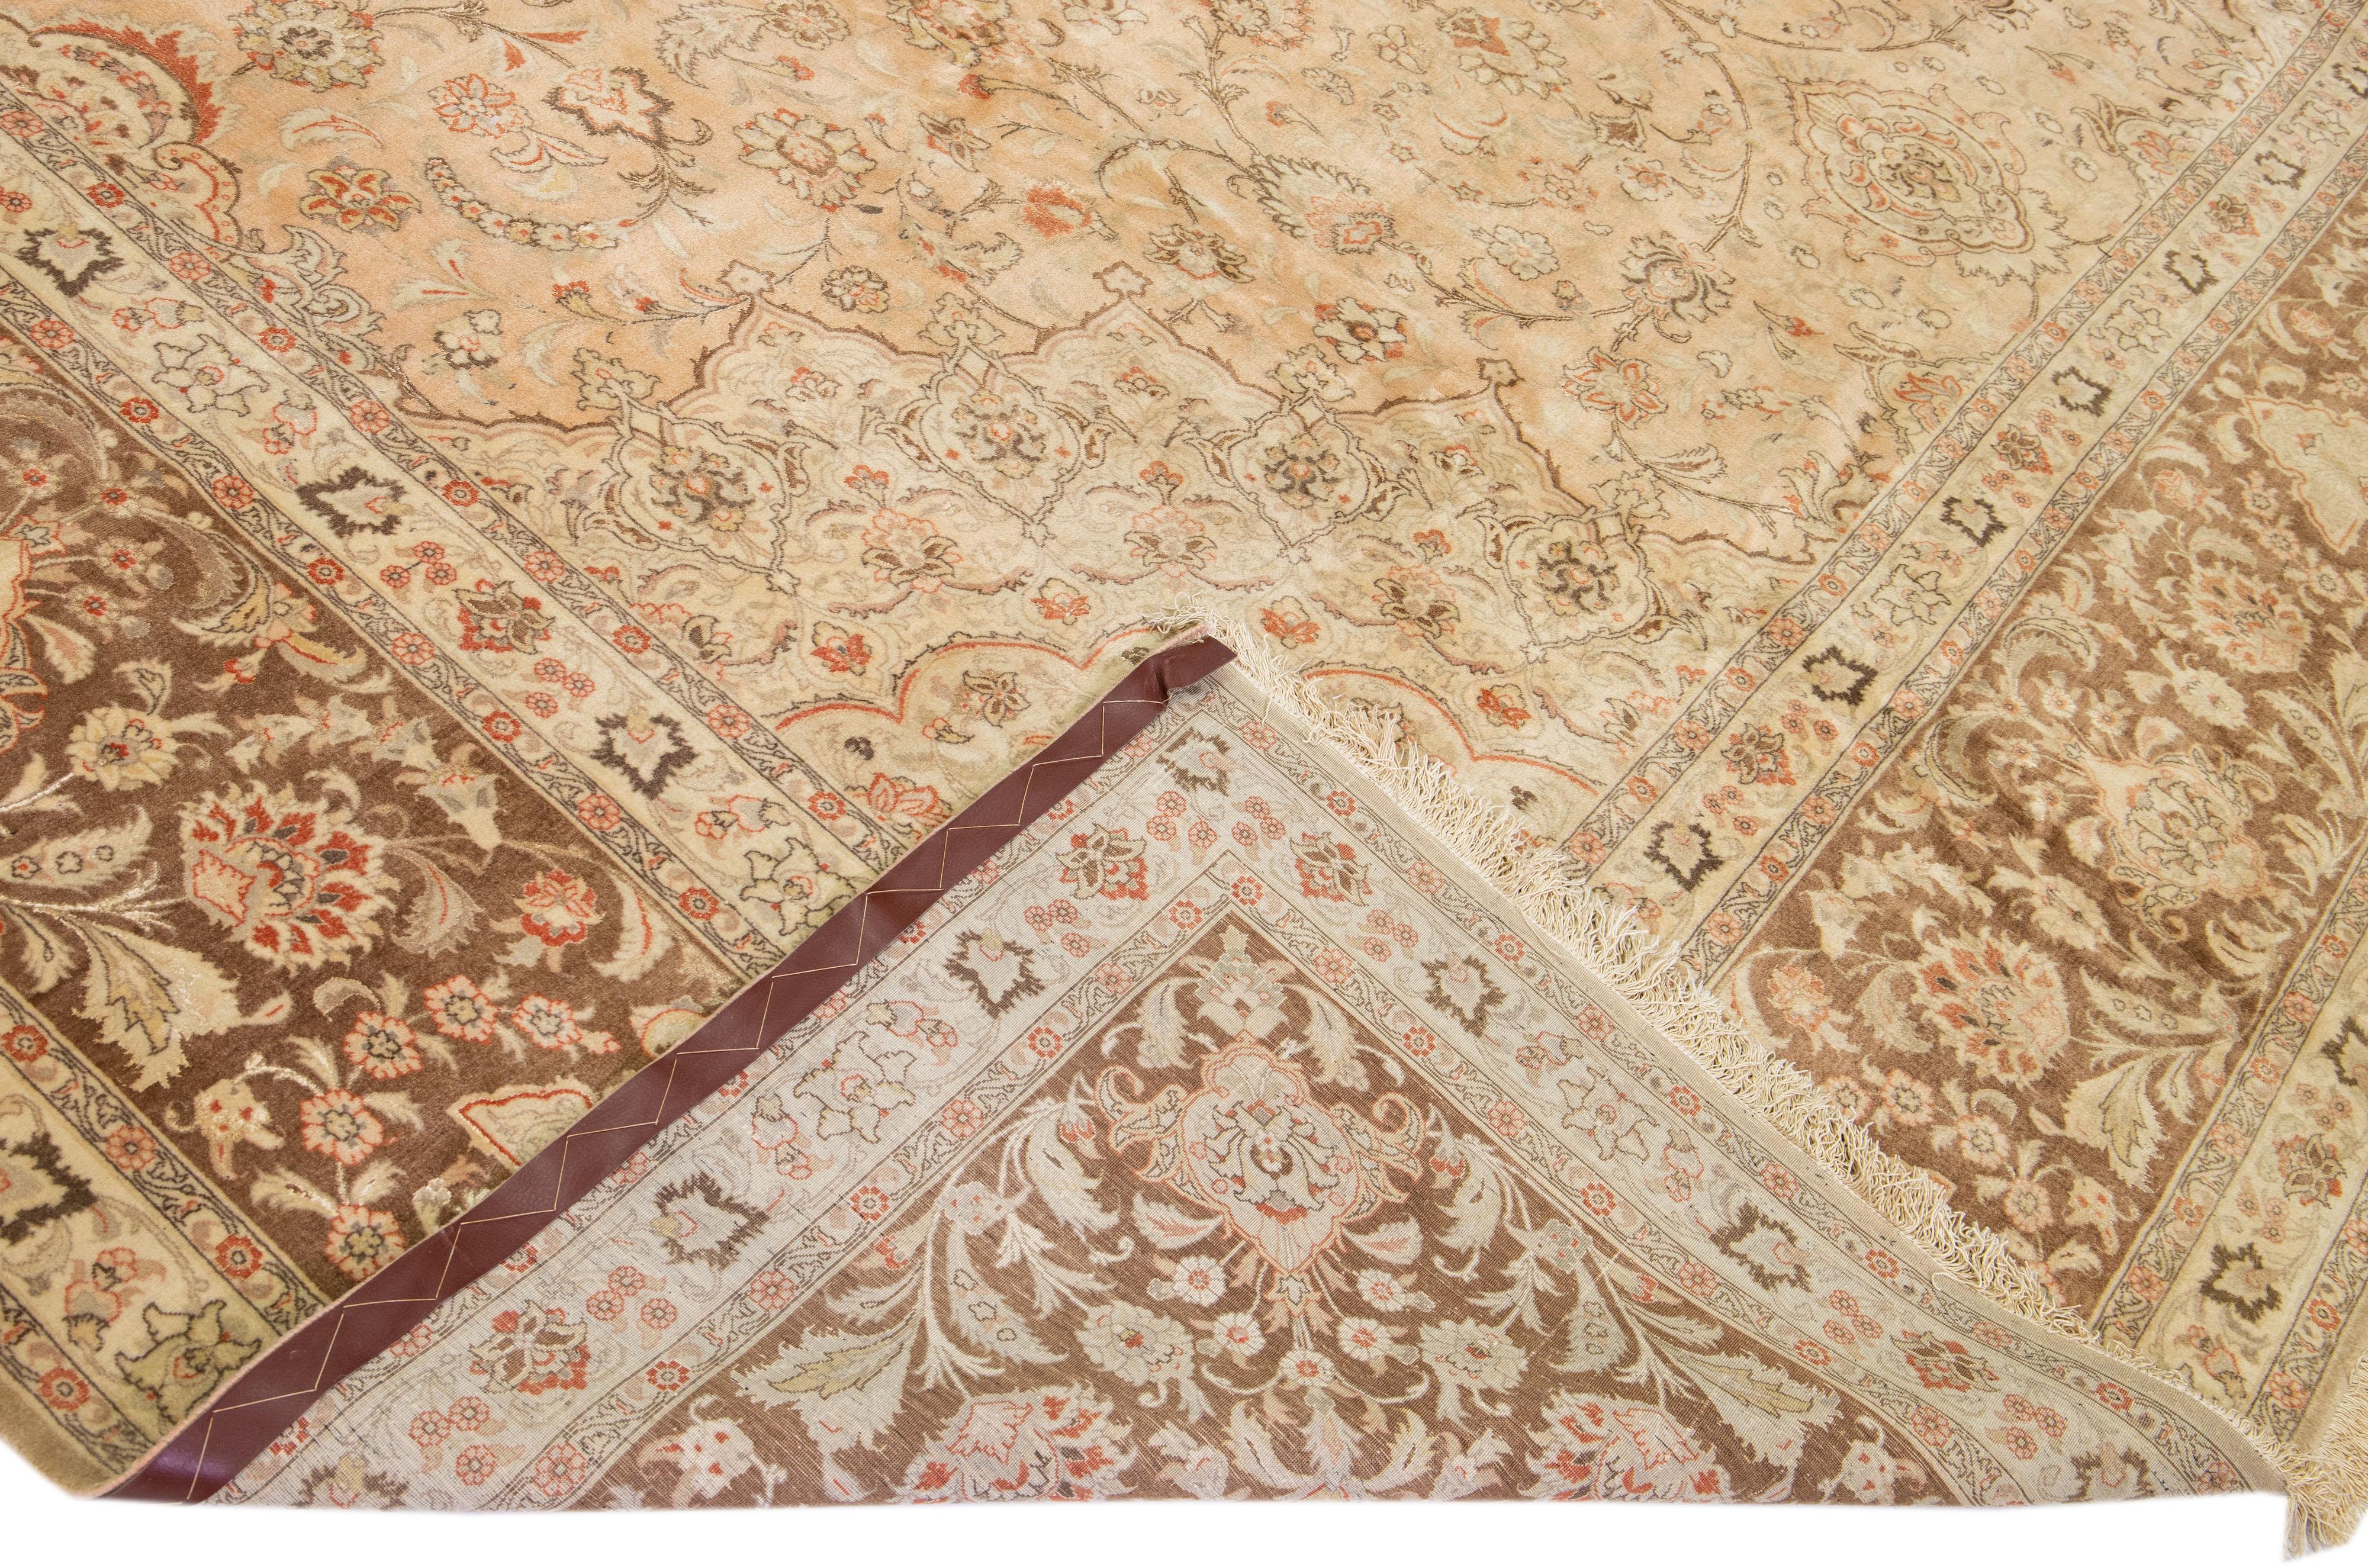 A beautiful Antique distressed hand-knotted wool rug with a peach color field. This rug has a brown frame with rust and gray accents in an all-over geometric floral design.

This rug measures 12'10